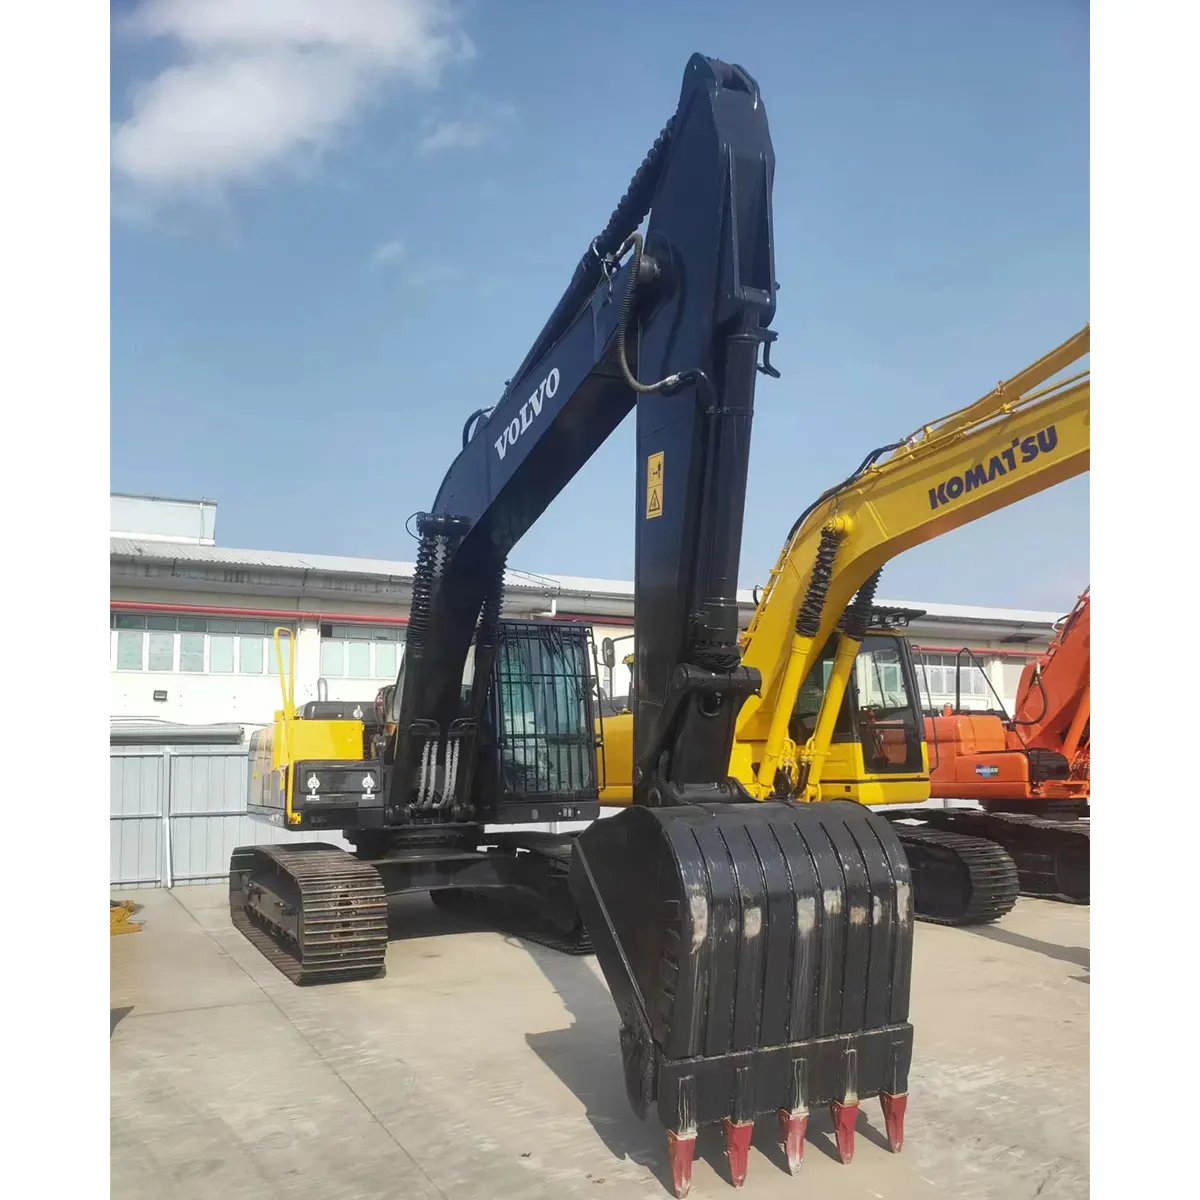 World renowned brand quality assurance vovo21 ton second-hand excavator EC210BLC There are other brands as well